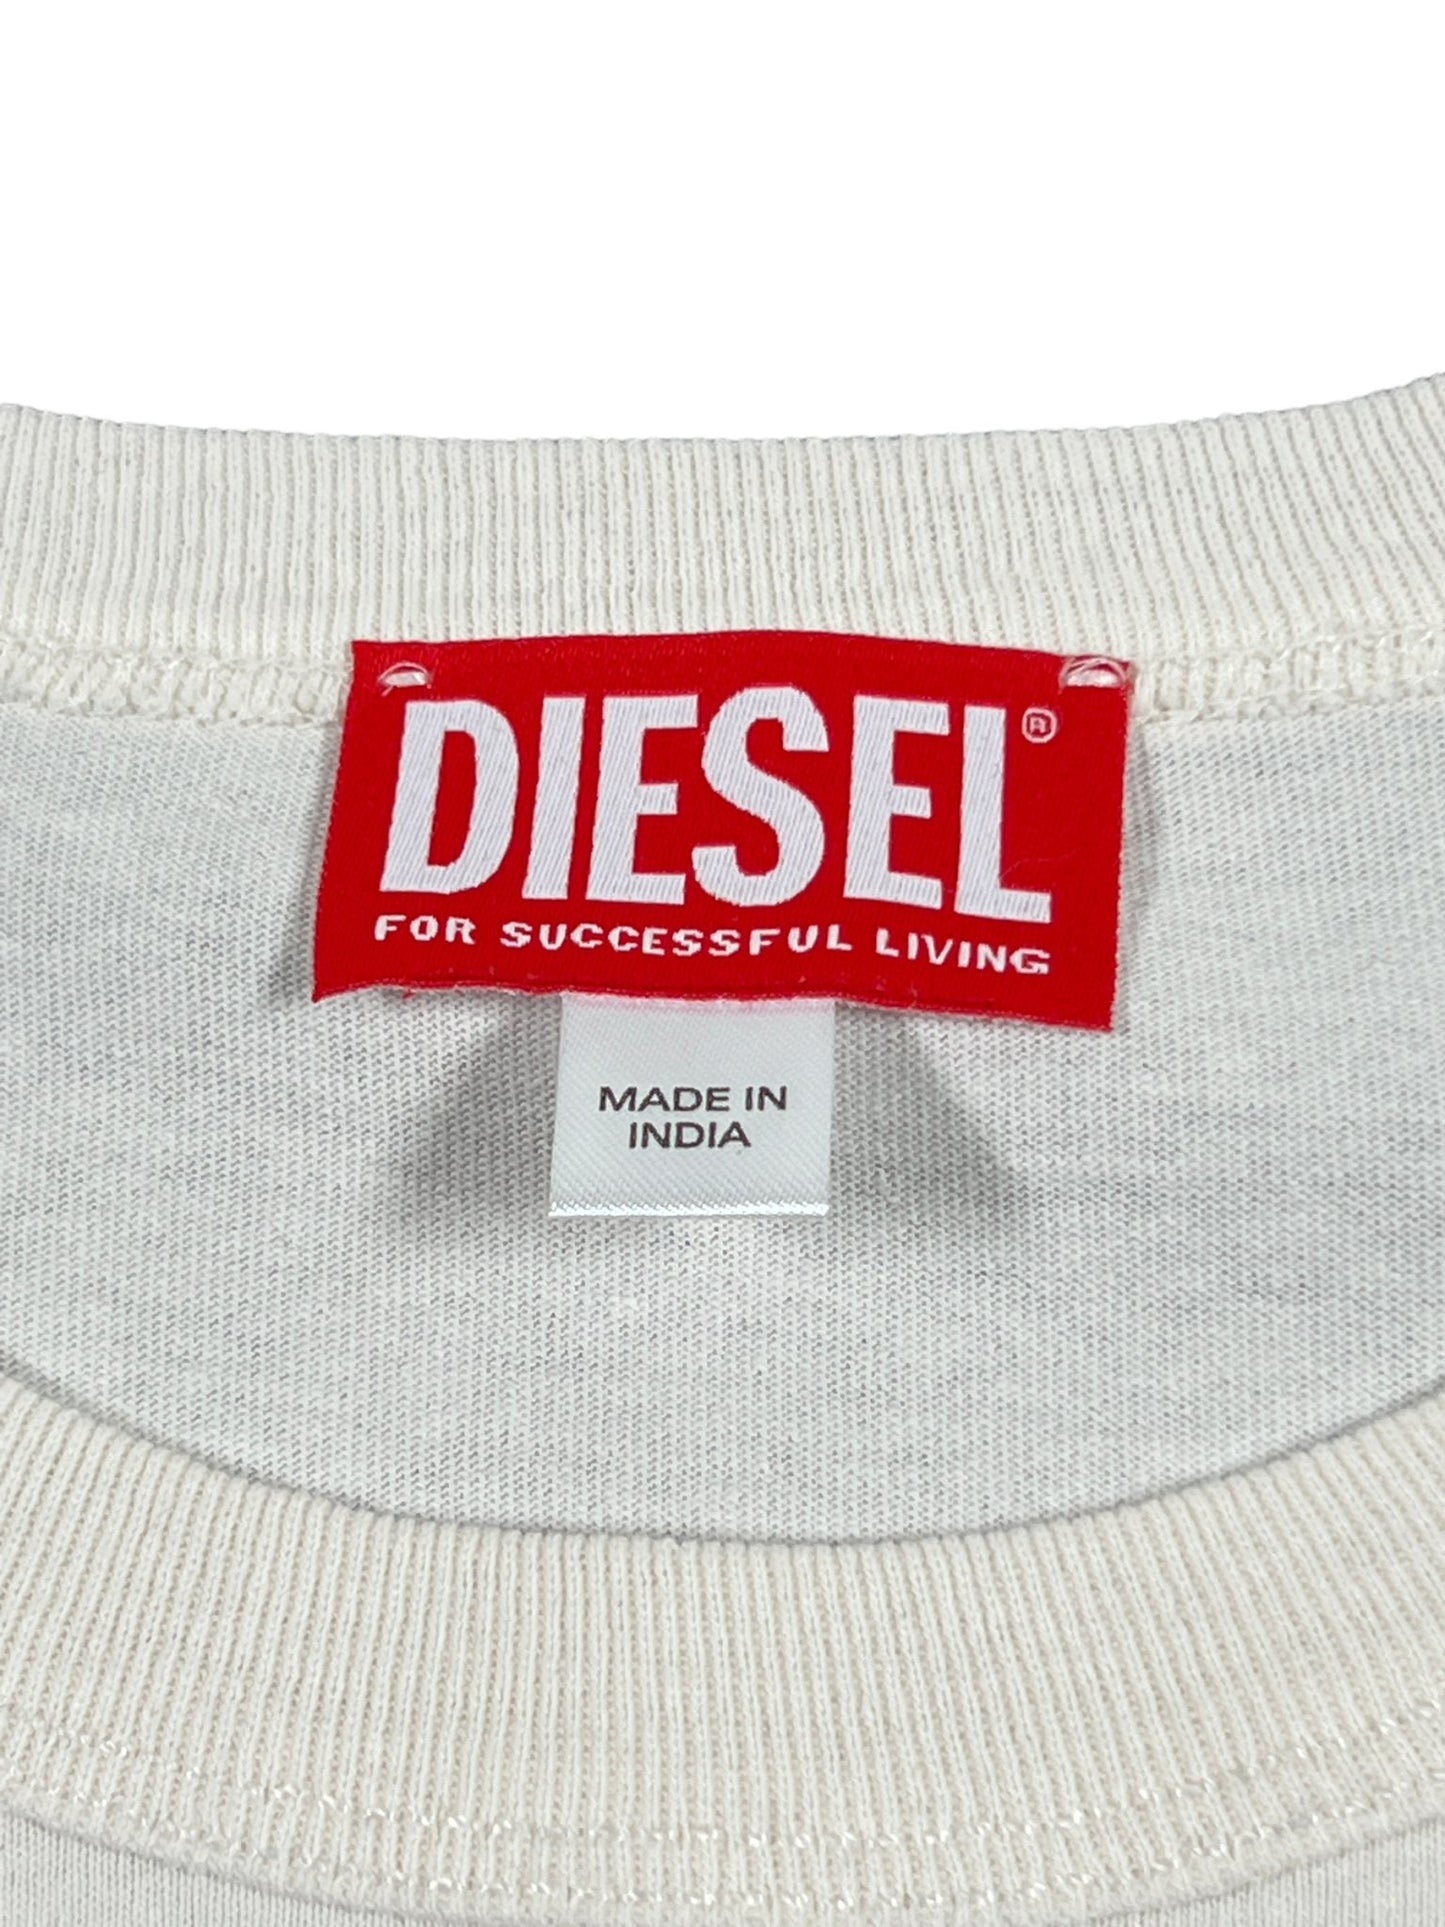 Red DIESEL T-RUST t-shirt brand label on a grey textile with a 'made in india' tag below.